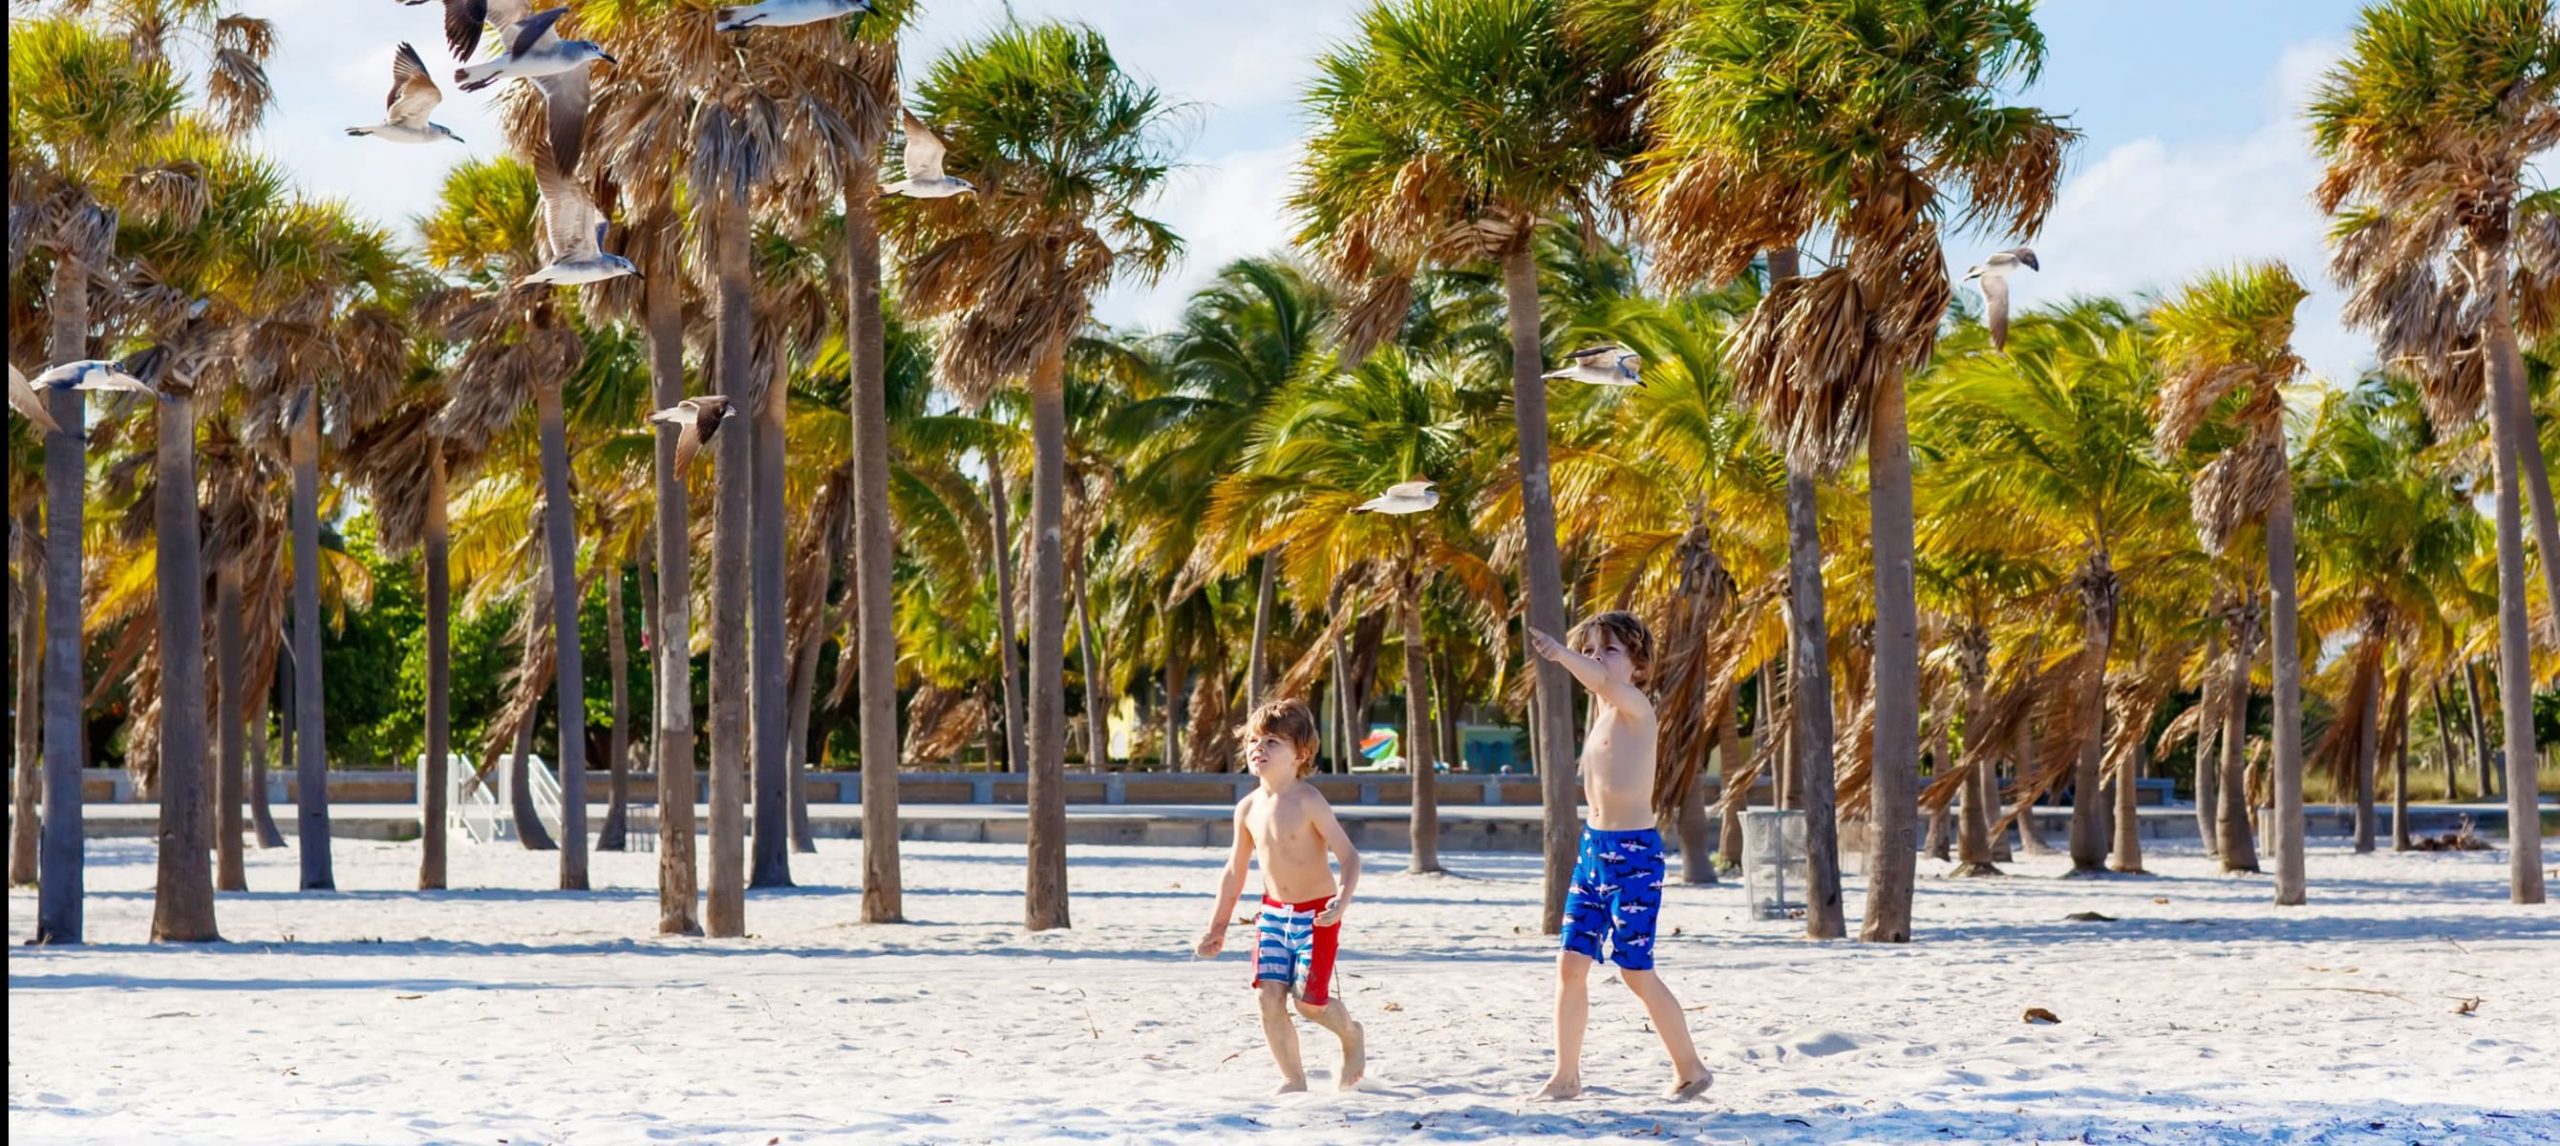 Two little boys playing at the beach in Miami, Florida.